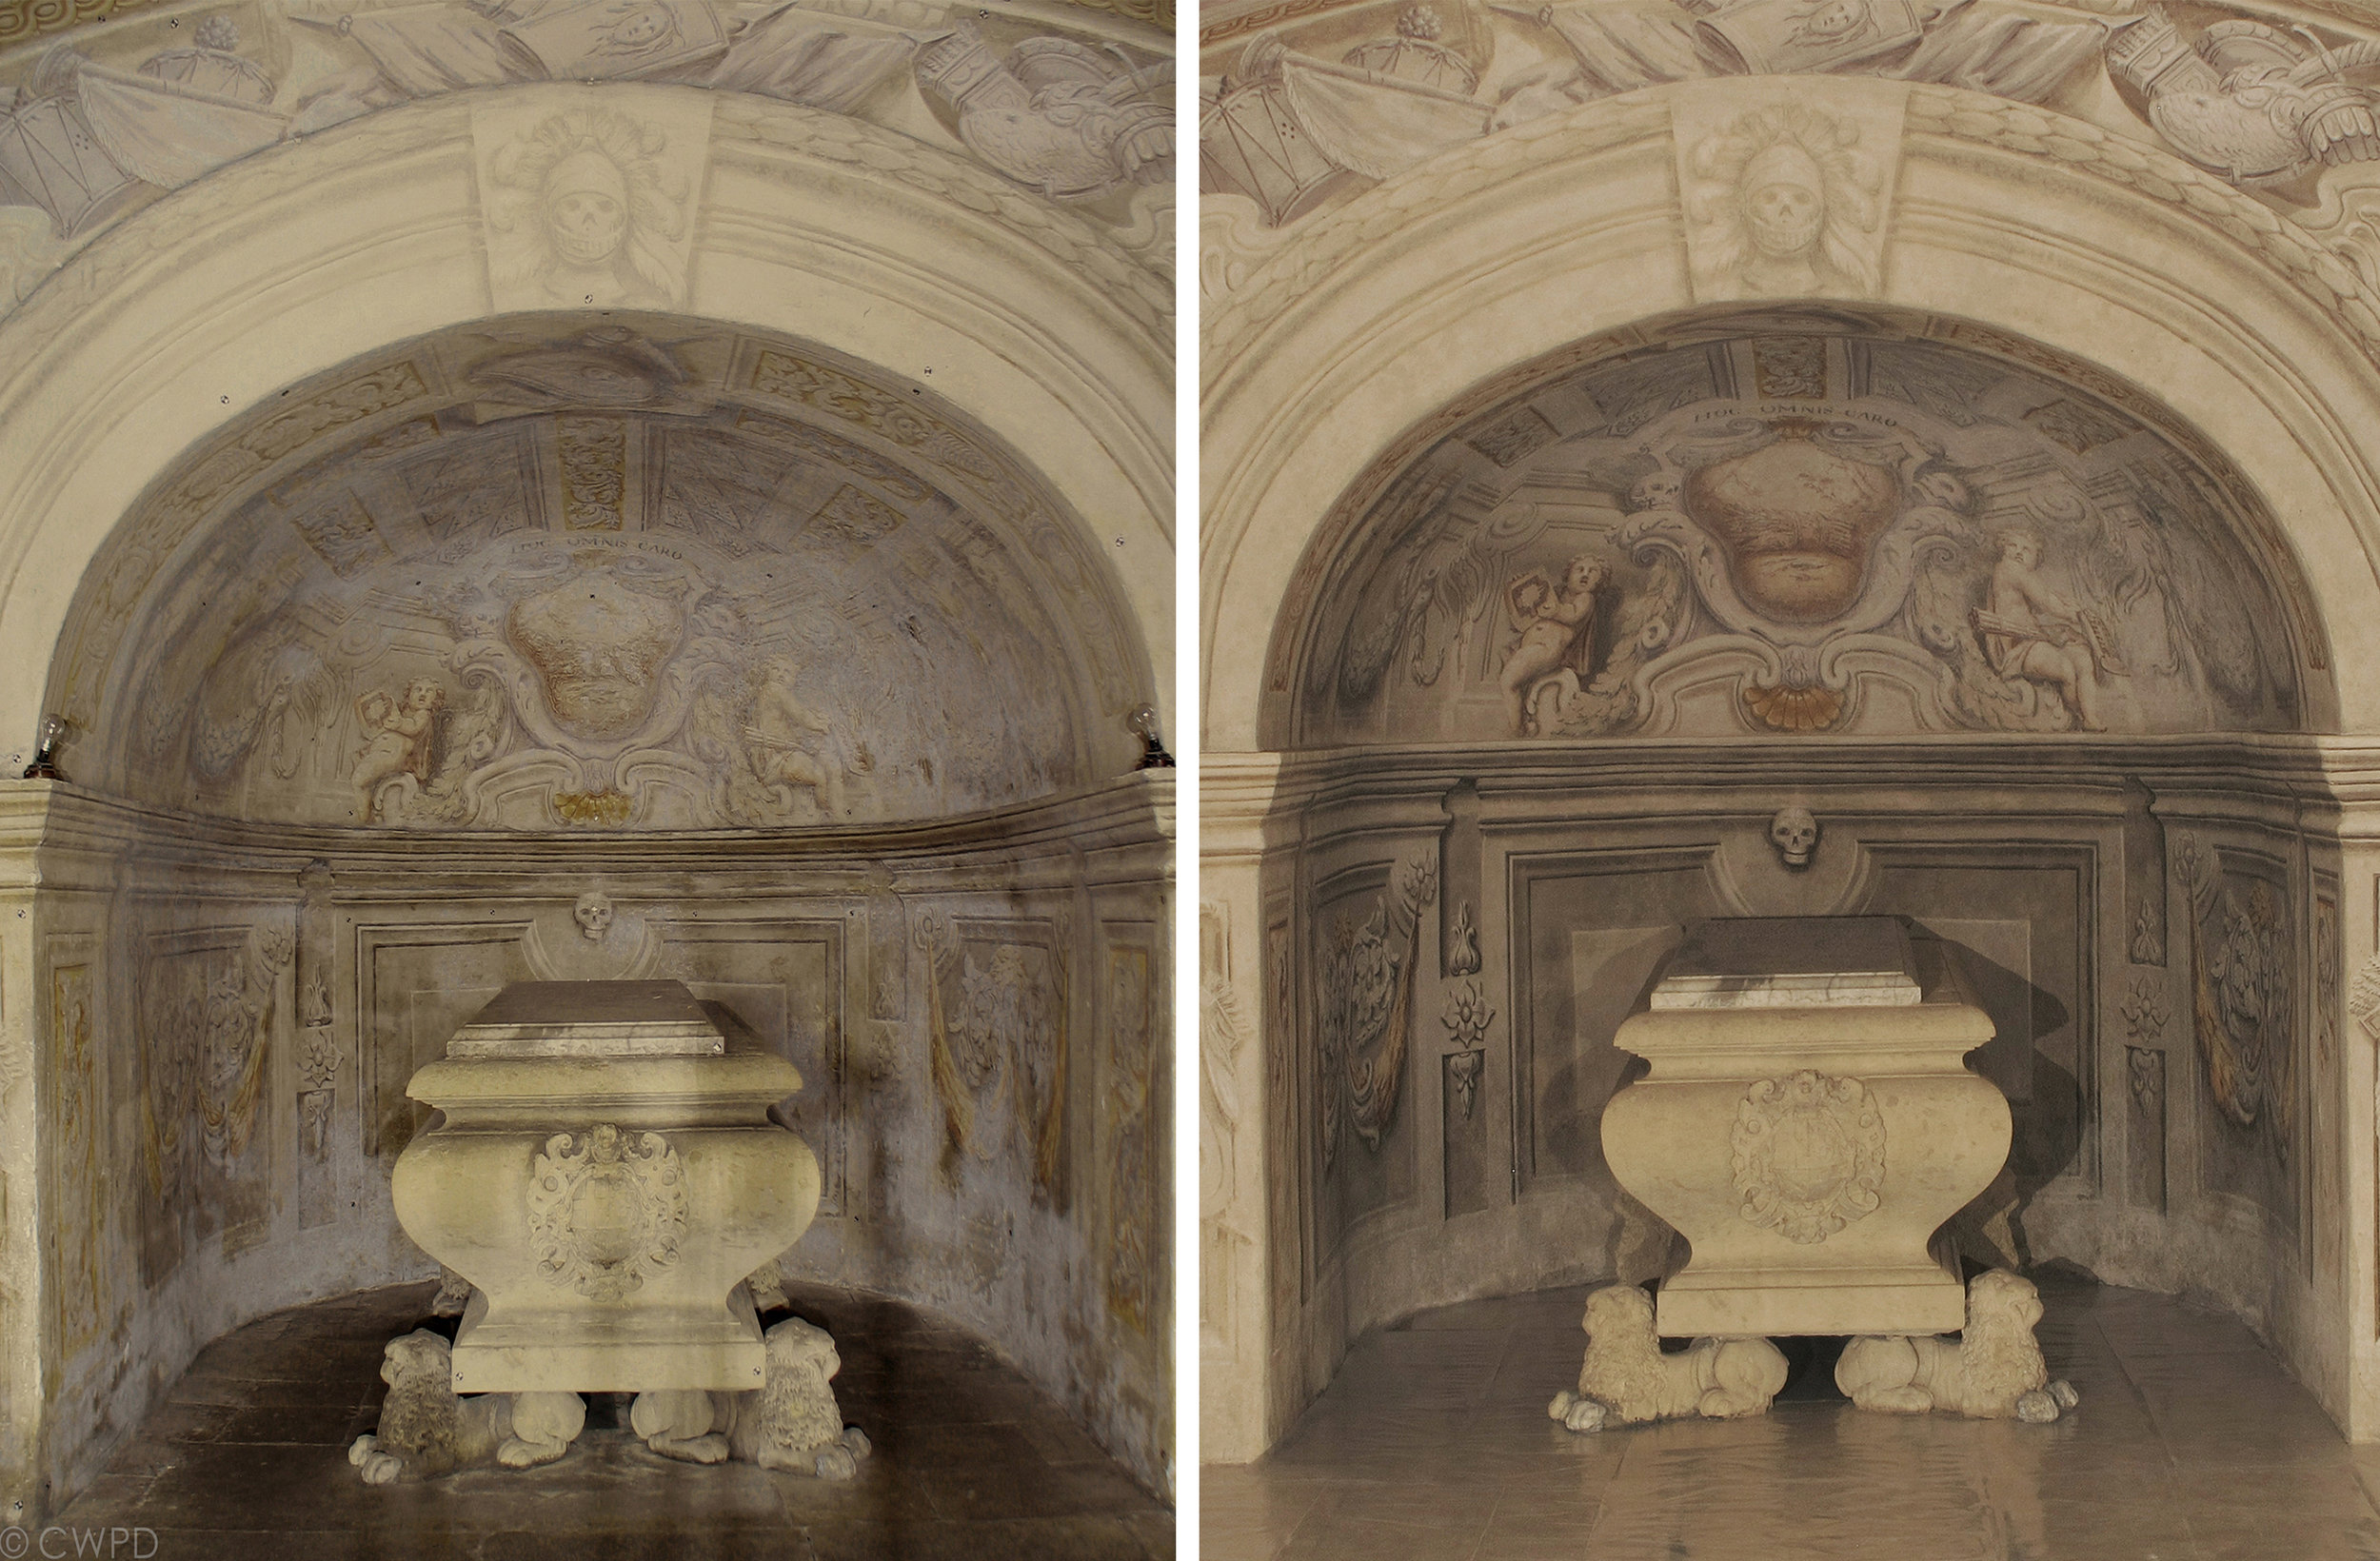  Detail of the Crypt before (left) and after (right) conservation treatment.&nbsp;  Image © Courtauld CWPD 